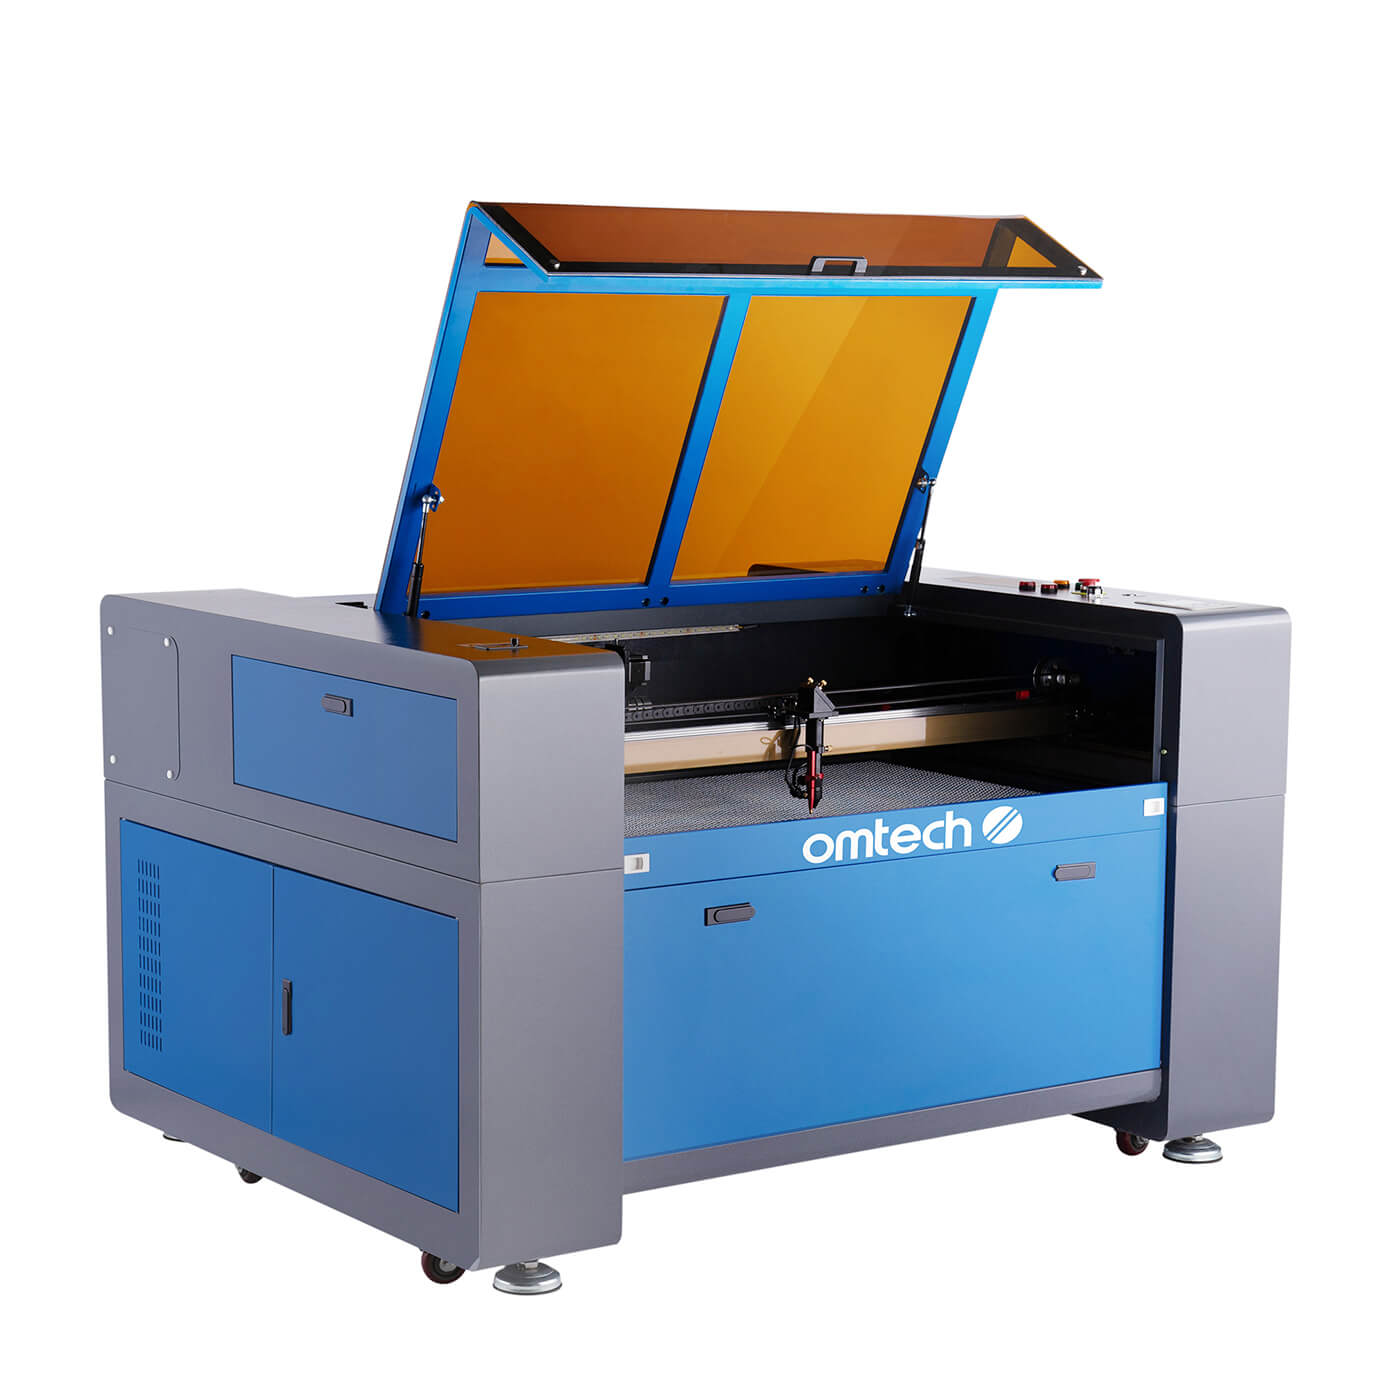 100W CO2 Laser Engraving Machine & Cutter with 1000x600mm Engraving Area | Max-1060